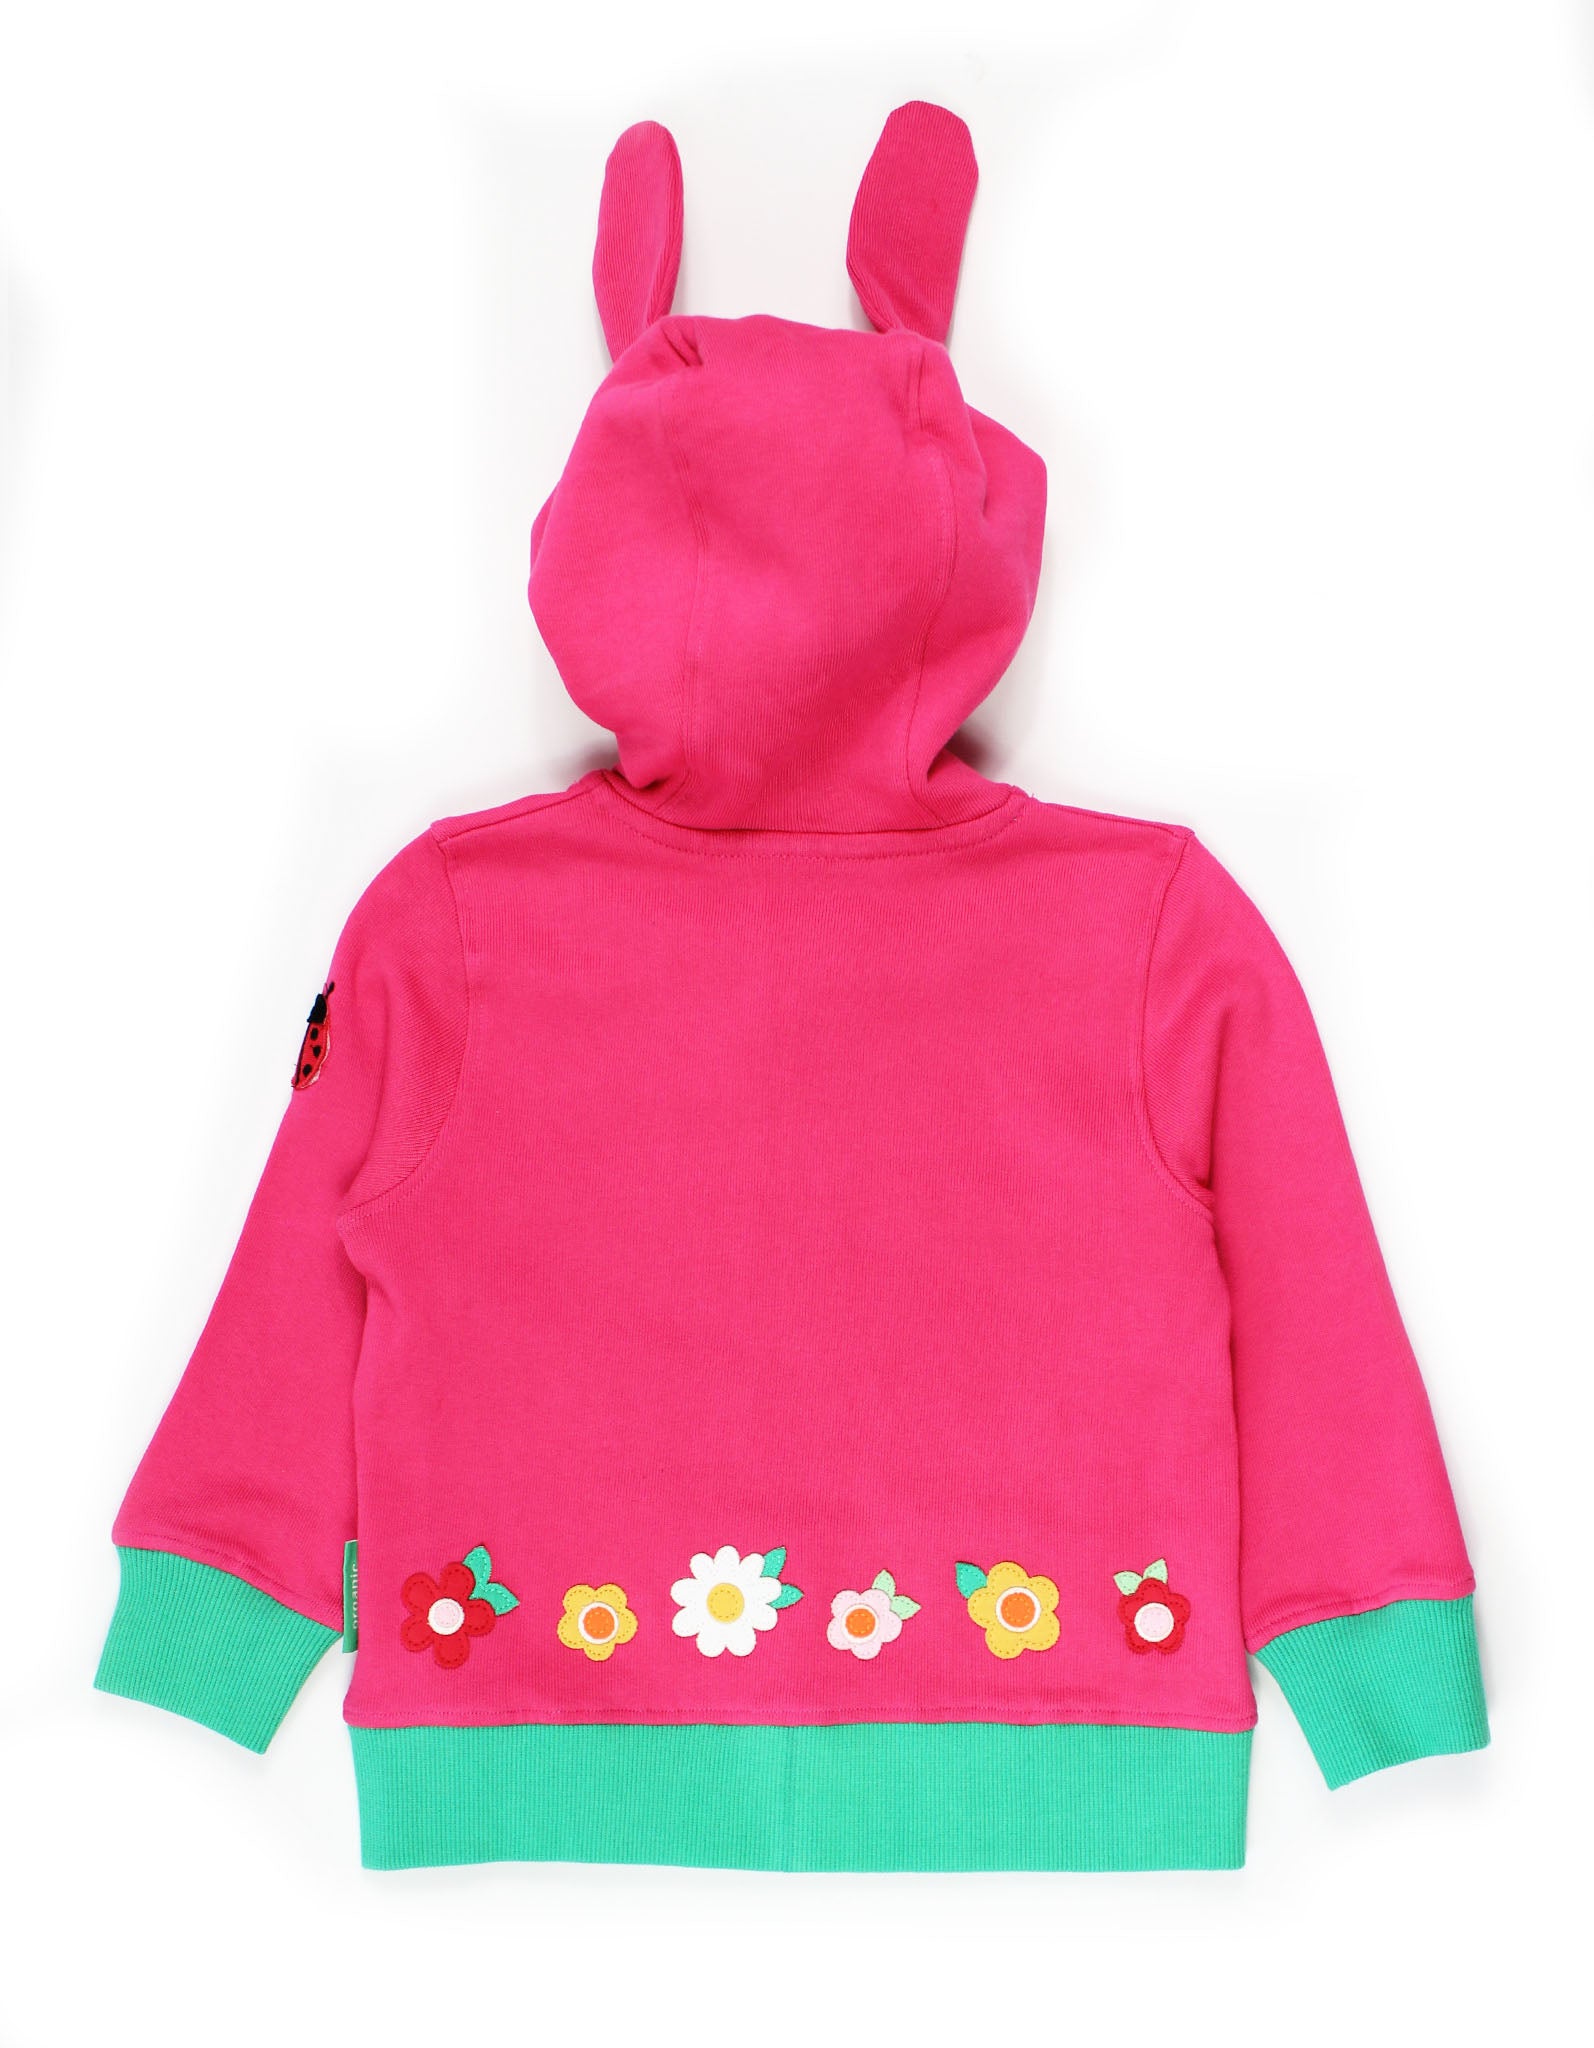 Toby Tiger Organic Hoodie - Leaping Bunny Applique